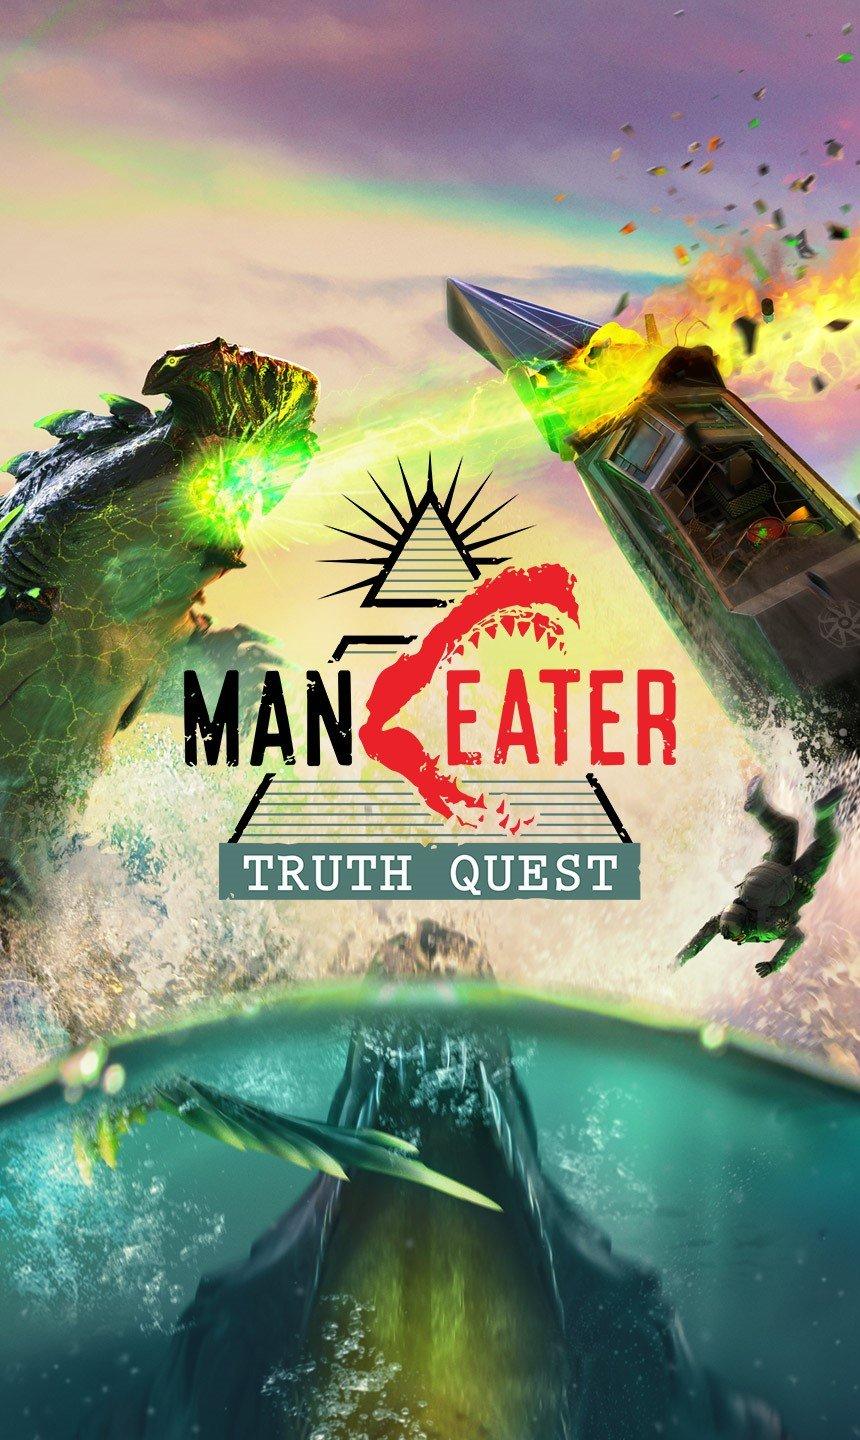 Maneater on Steam